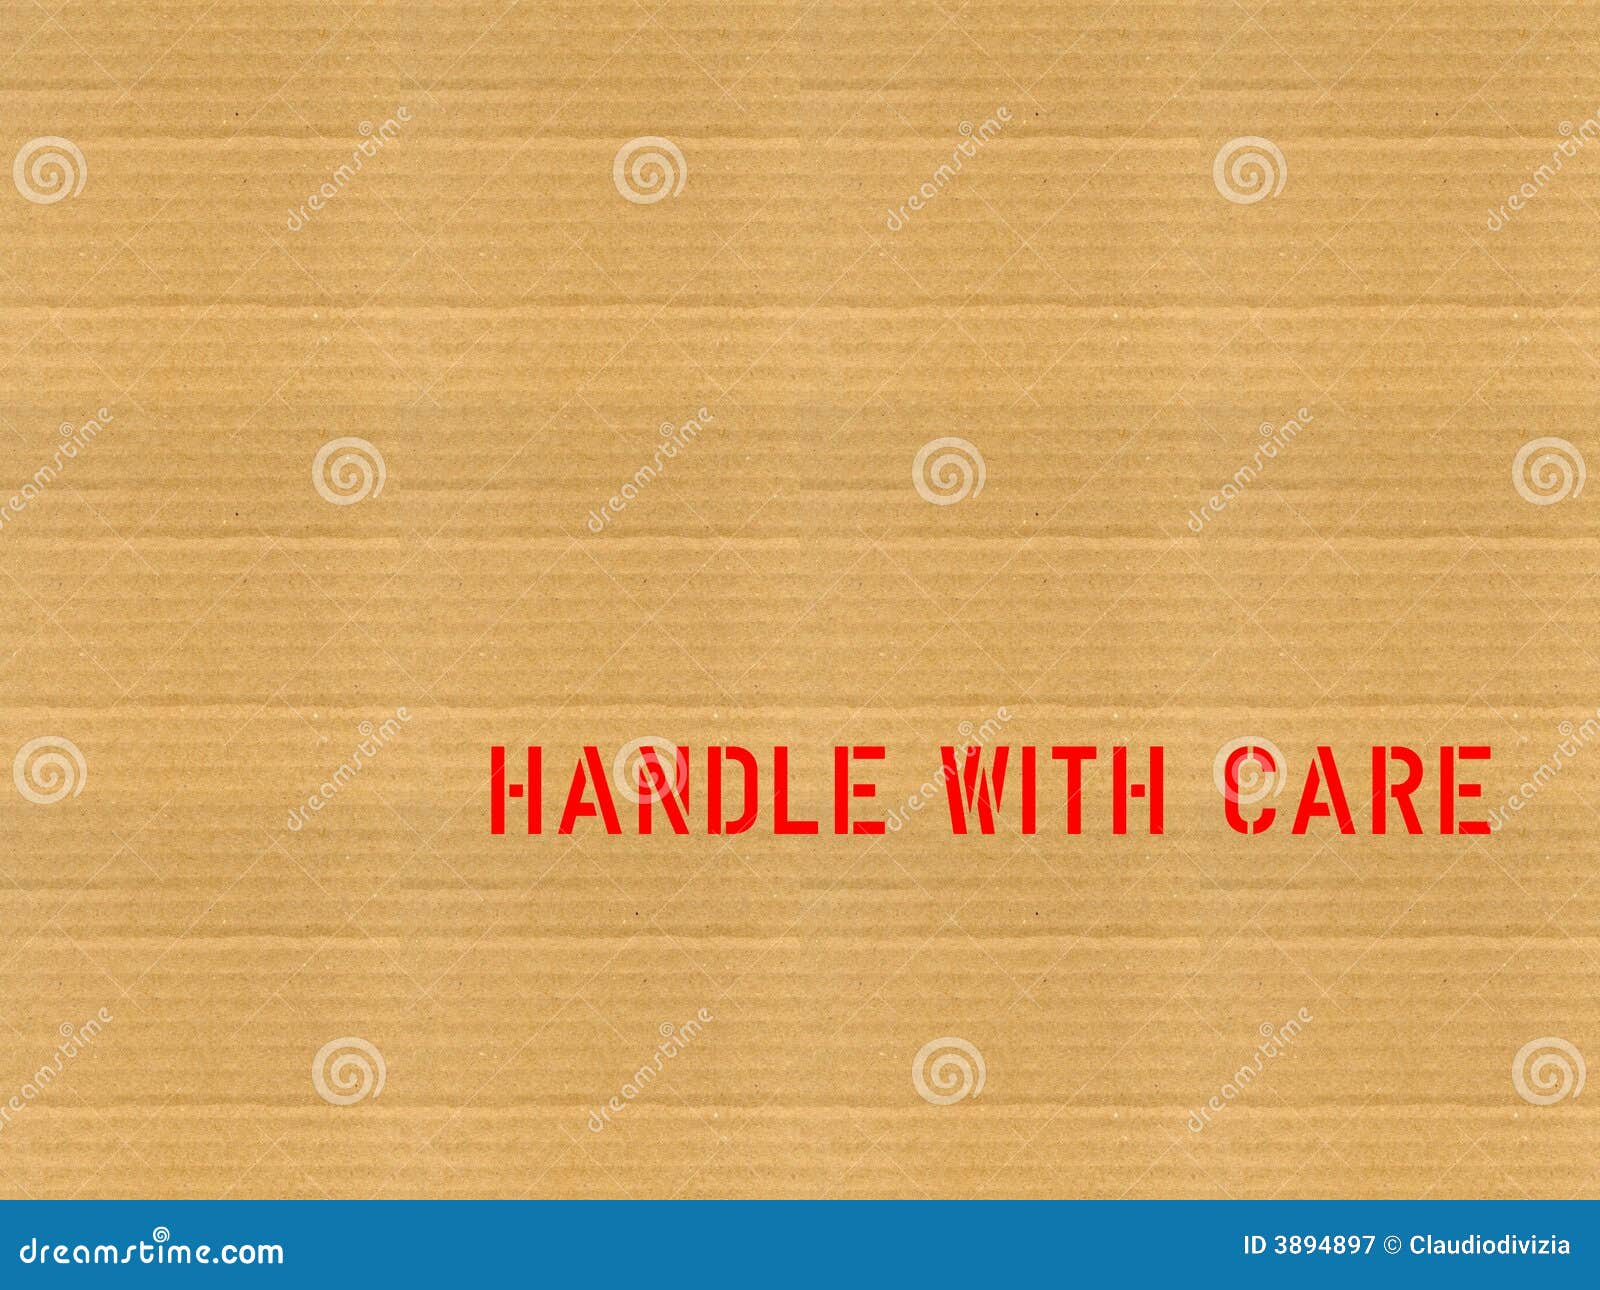 cardboard / handle with care